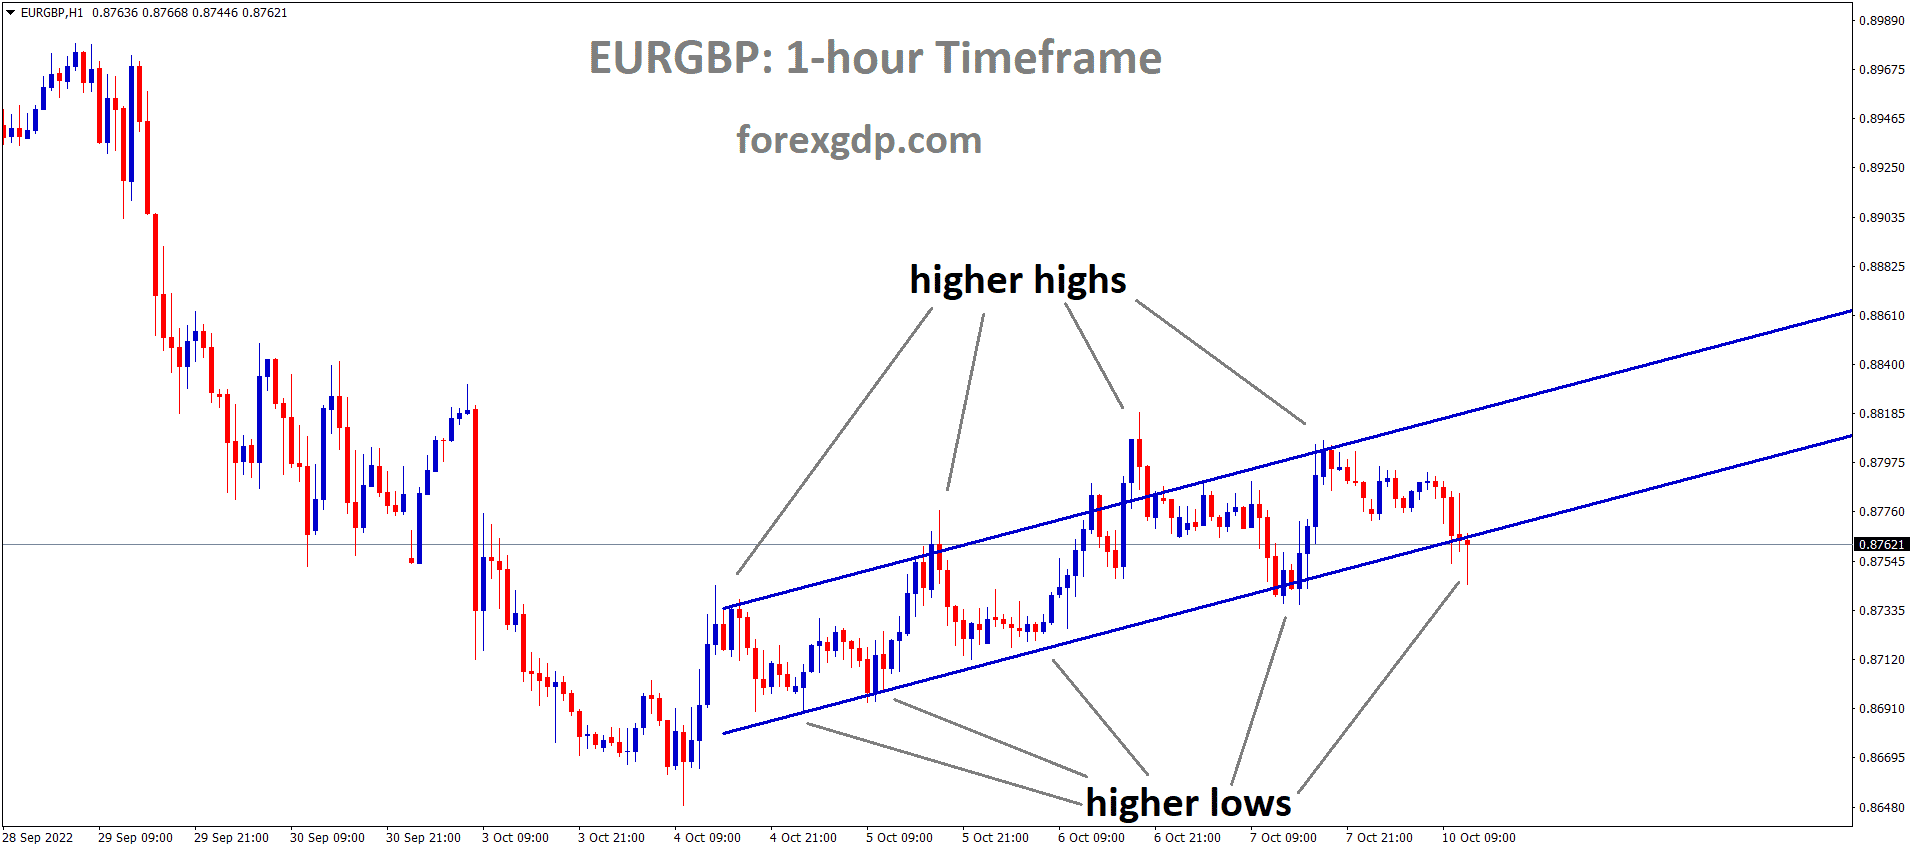 EURGBP is moving in an Ascending channel and the market has reached the higher low area of the channel